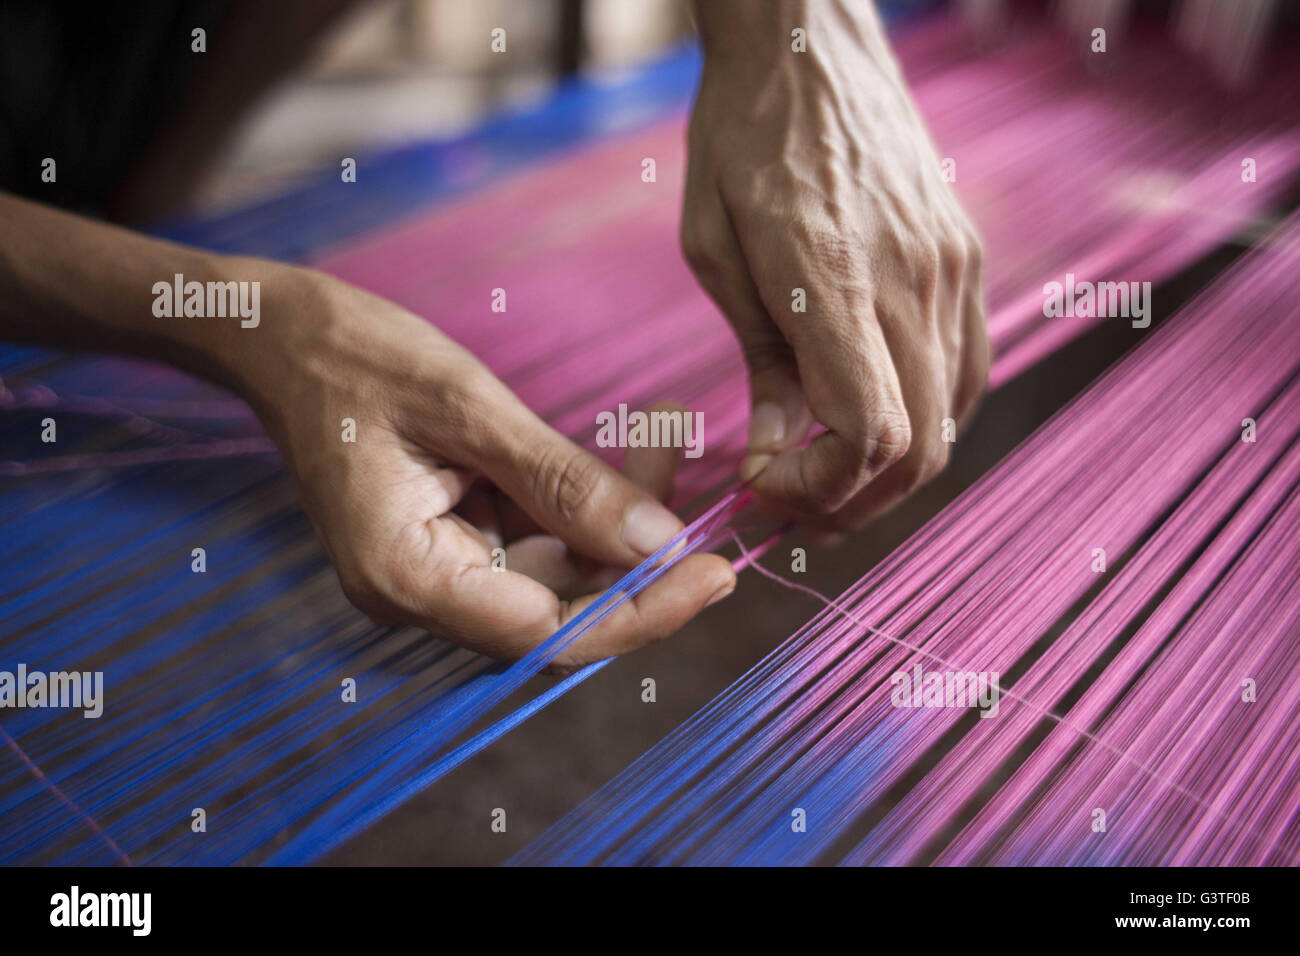 Dhaka, Bangladesh. 15th June, 2016. Handloom weaver weaves Banarasi saree on a traditional wooden hand weaving loom at Mirpur Banarasi Palli, in Dhaka, Bangladesh. Business in Mirpur Banarasi Palli, a market place well-known for different kinds of traditional Banarasi Sarees in Bangladesh, is facing tough times. People, who used to go there to purchase the famous Banarasi sarees, are increasingly opting for trendy Indian sarees. The popularity of these custom-made sarees is losing its charm as colorful Indian chic sarees are more in demand among local buyers. The Benarasi saree, whose history Stock Photo